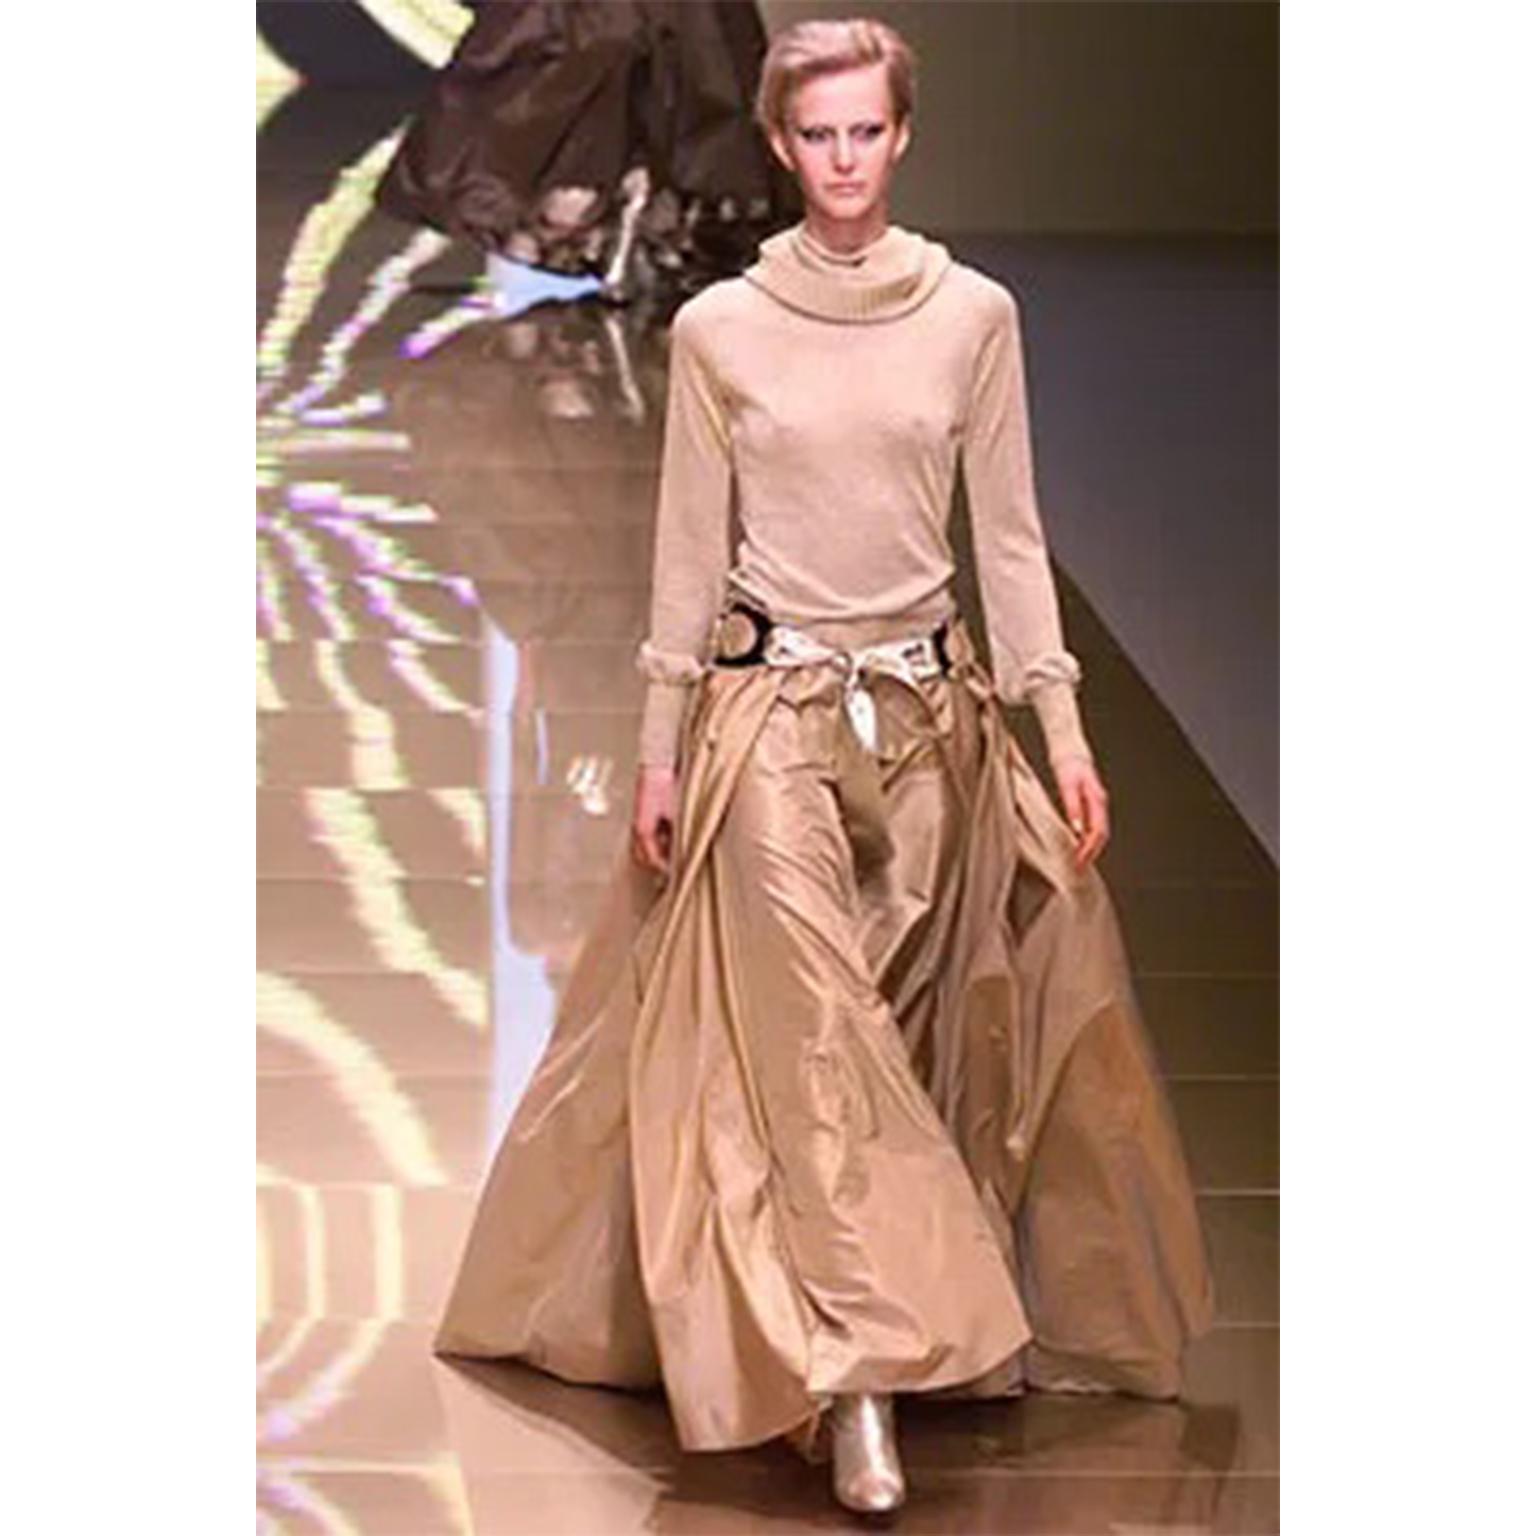 This stunning vintage Valentino Garavani belt is from the Fall 2002/03 runway collection. The belt is in a luxe metallic gold and features two oversized silver buckles. Similar buckles were used in many accessories from this collection.	The belt